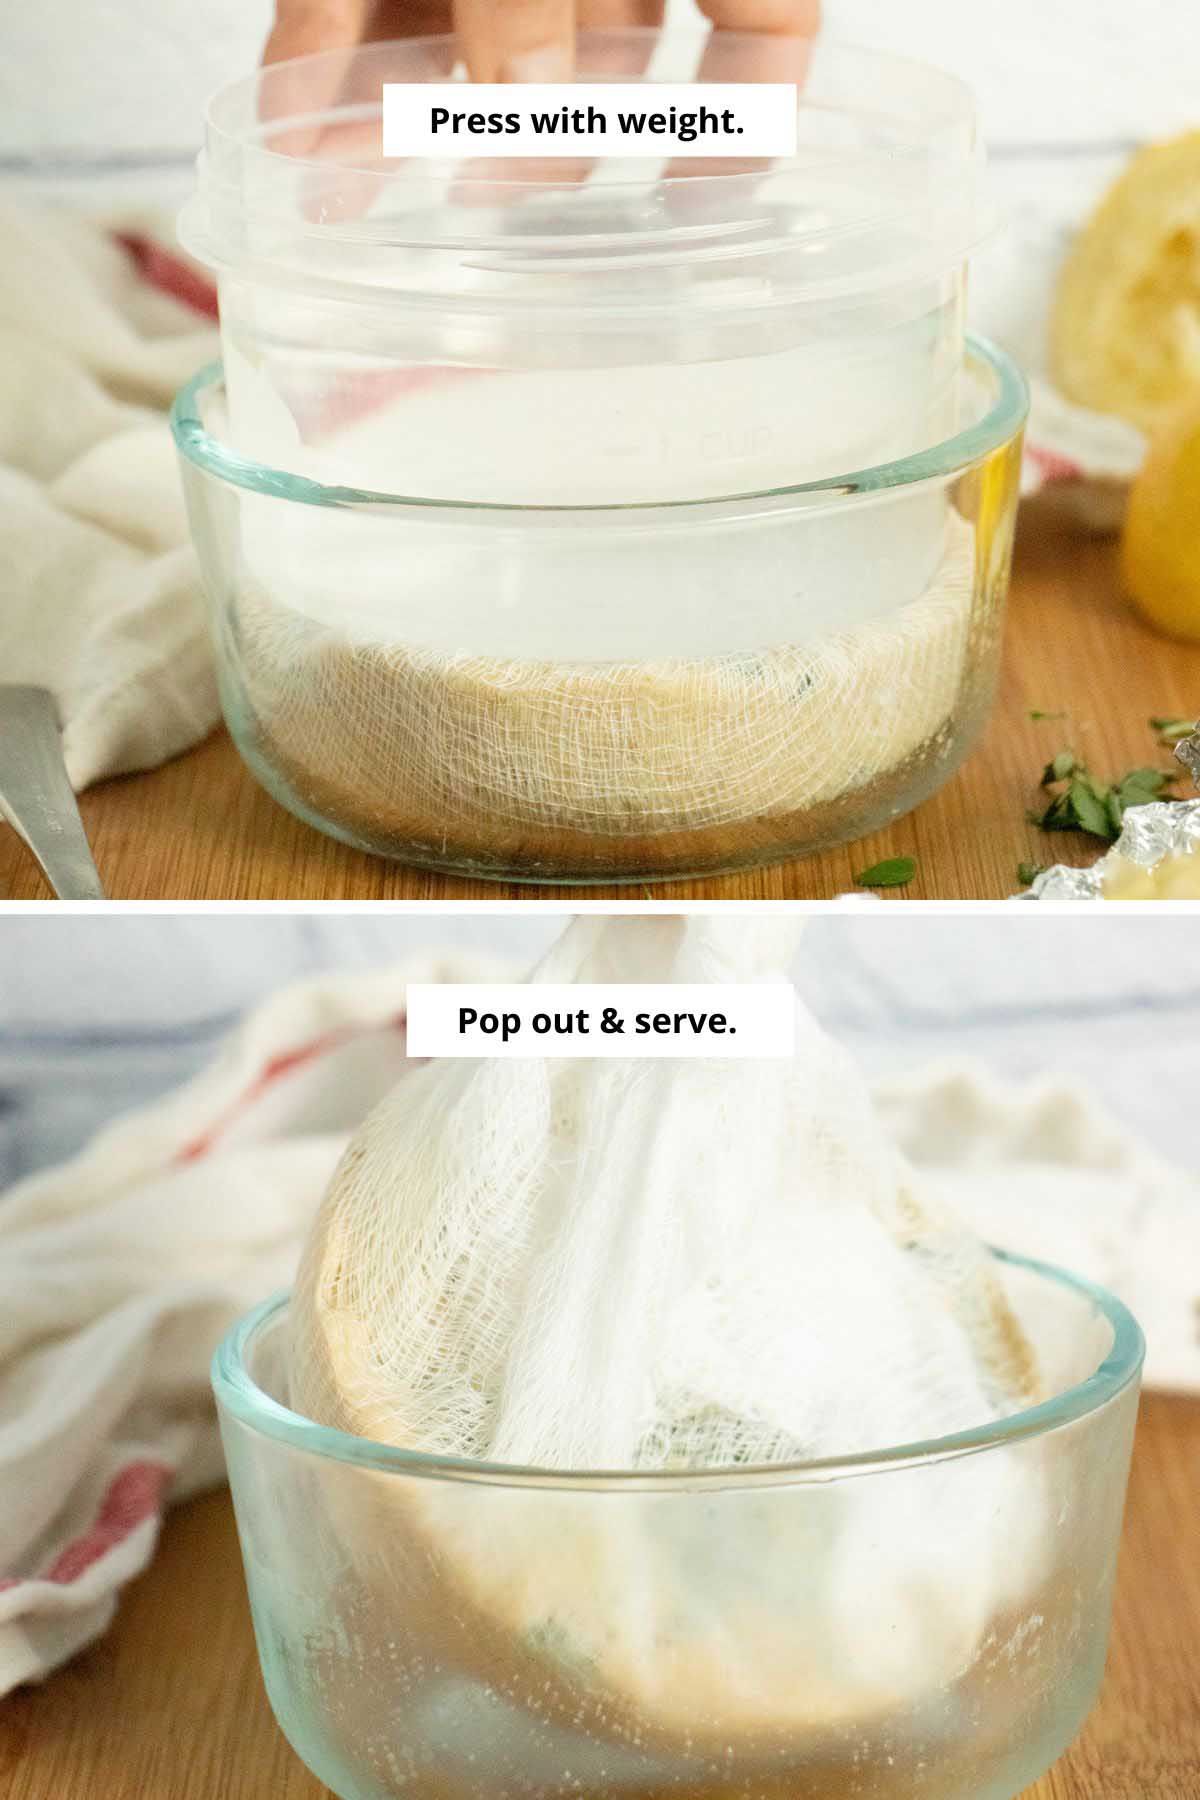 image collage showing pressing the vegan cream cheese with a container of water and popping it out of the bowl after pressing